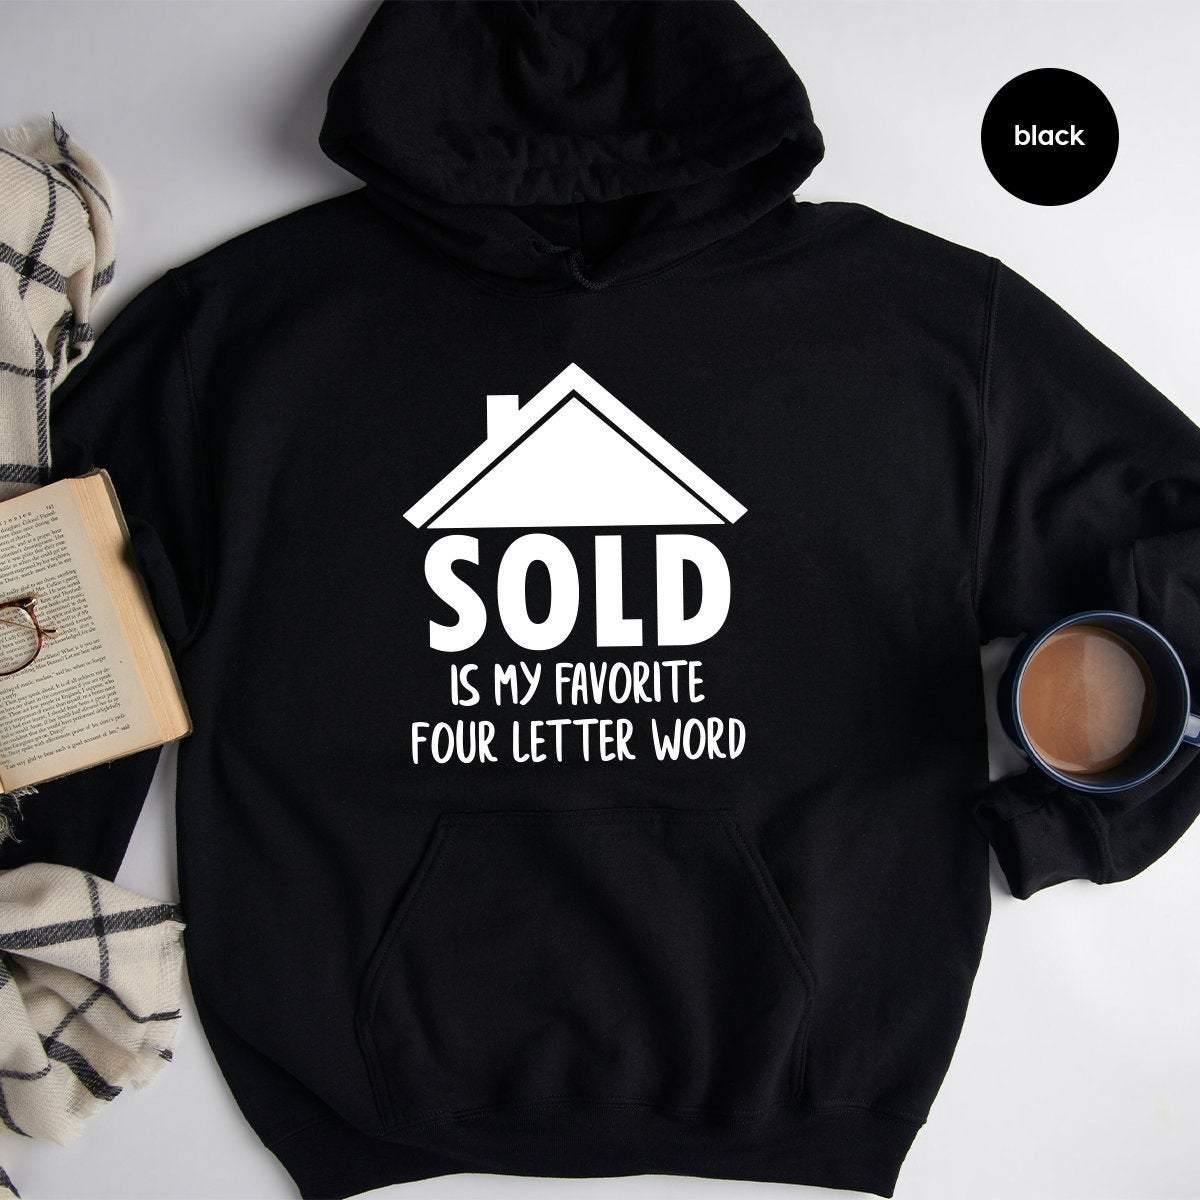 Real Estate Hoodie, Funny Real Estate Hoodie, Real Estate Gift, Sold Is My Favorite 4 Letter Word, Investor Shirt, Home Shirt - Fastdeliverytees.com